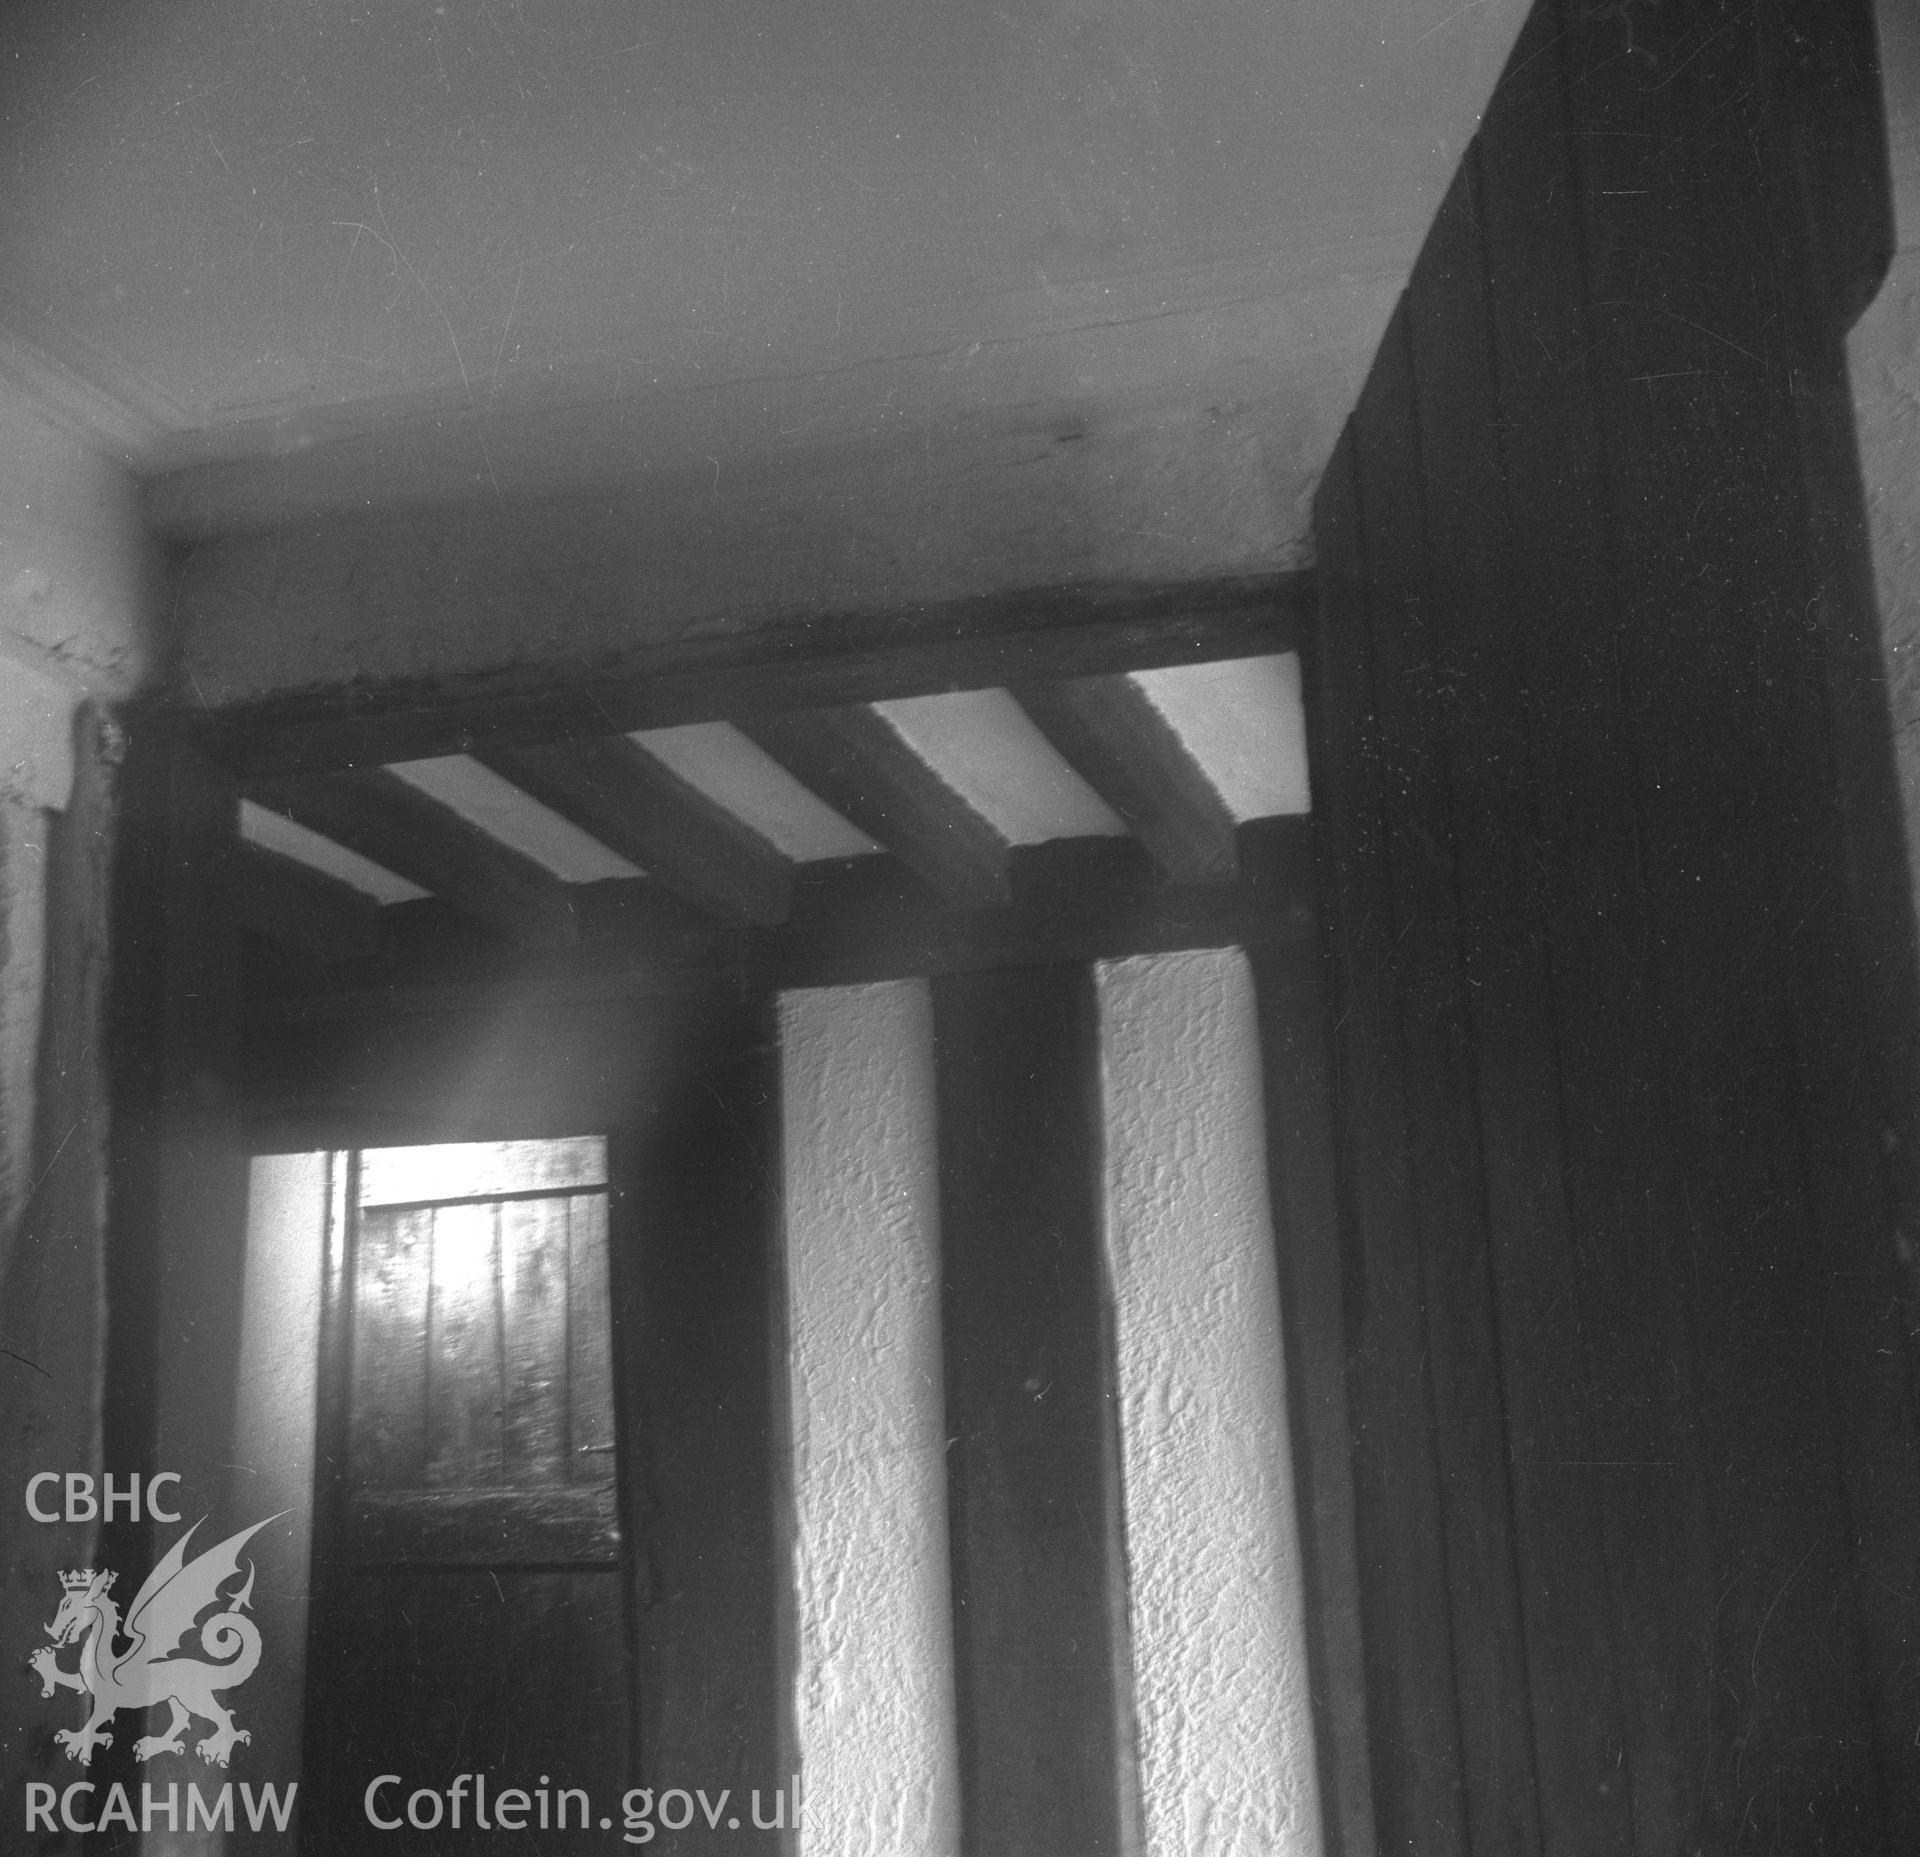 Black and white acetate negative showing interior detail of ceiling joists and doorway, Brithdir-Mawr, Cilcain.